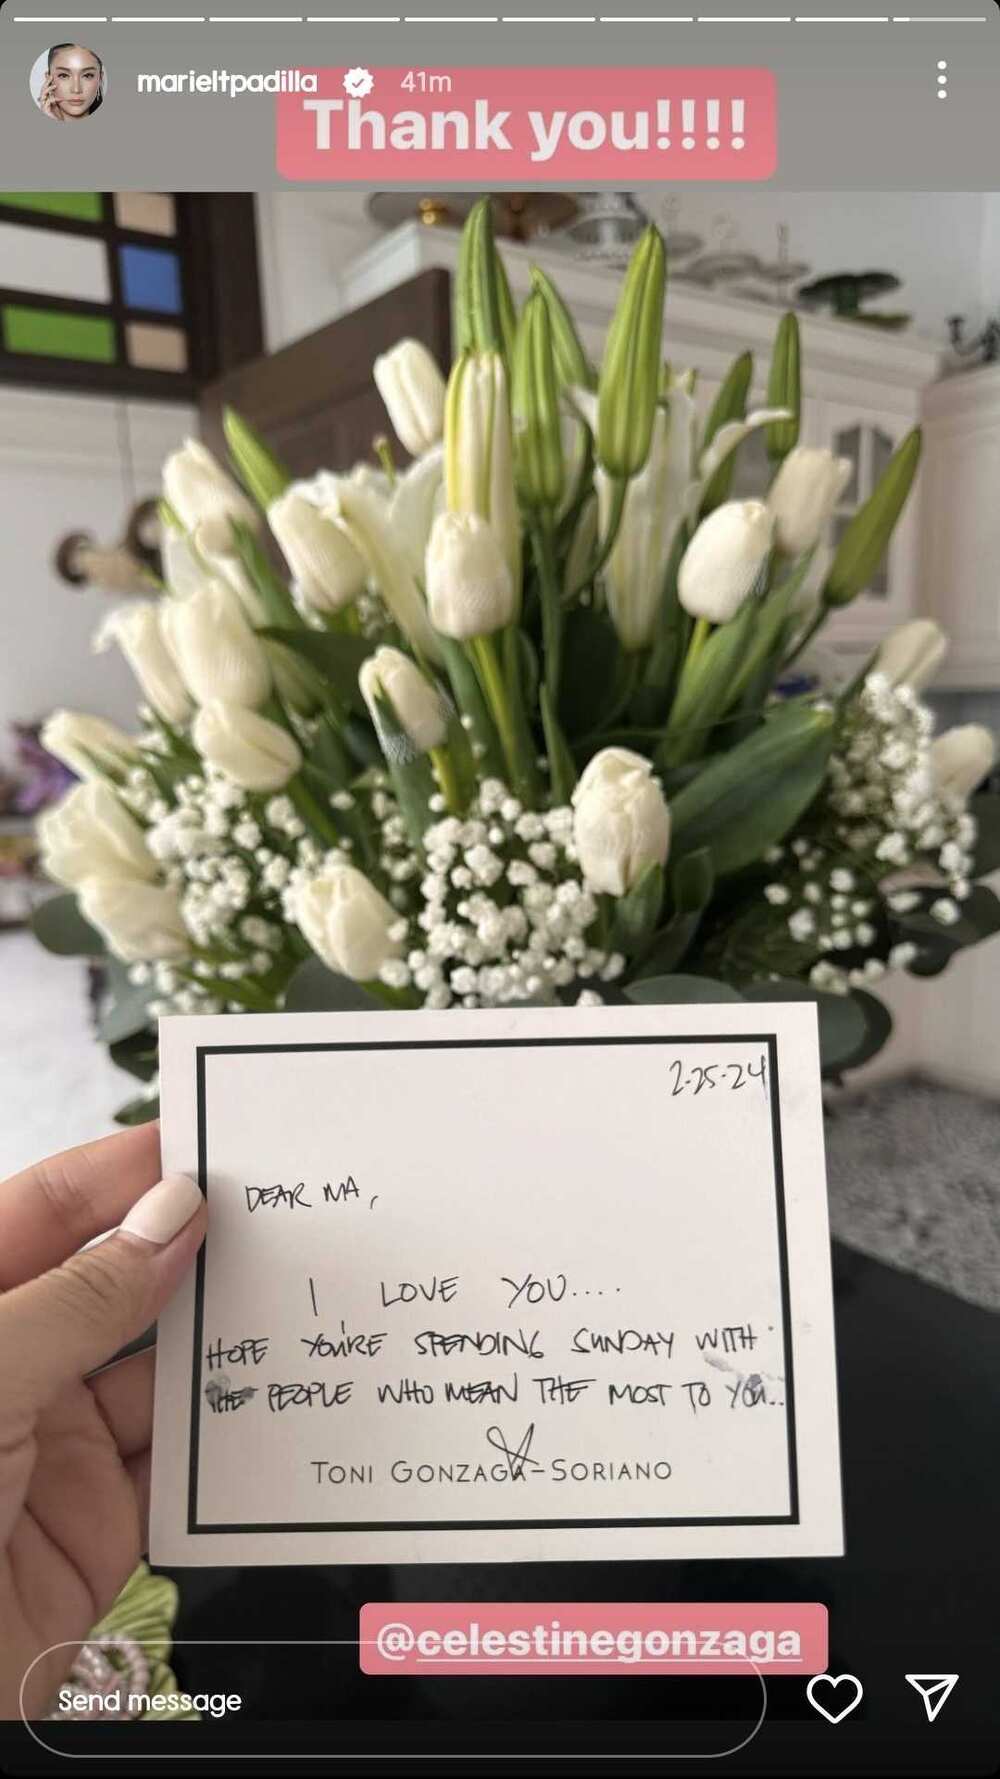 Mariel Padilla receives flowers and note from Toni Gonzaga amid 'IV drip' issue